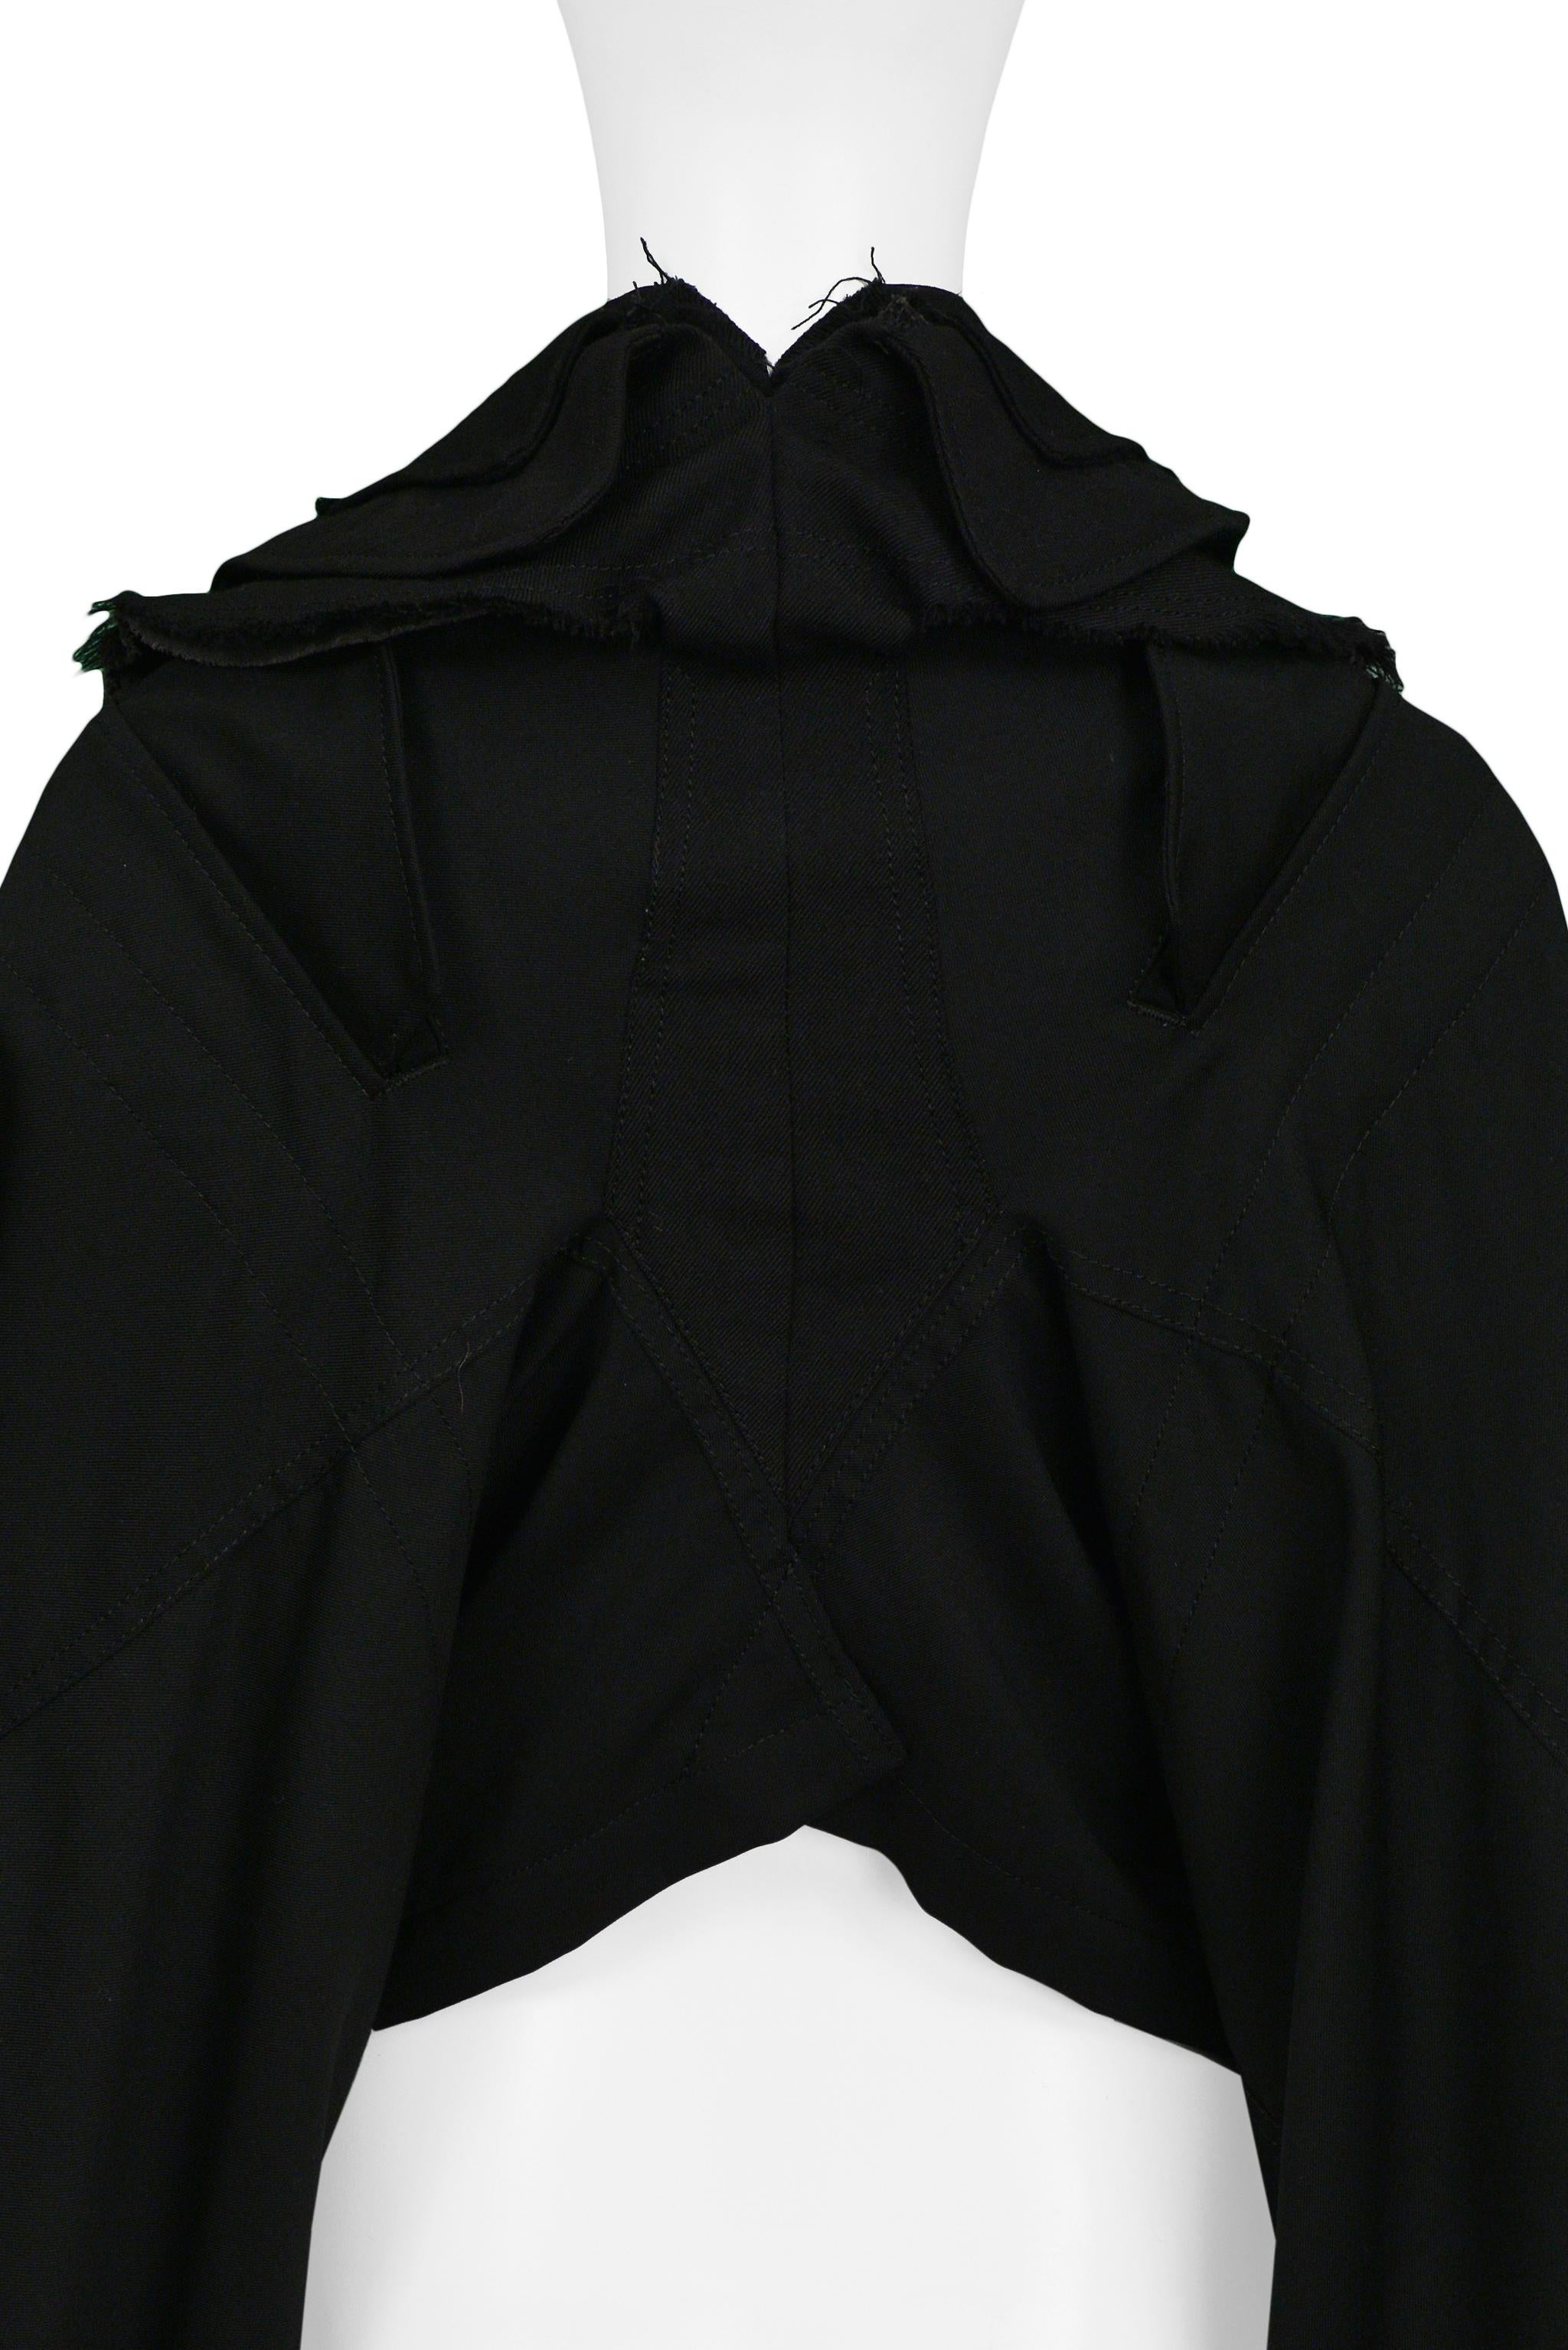 Junya Watanabe Black Deconstructed Military Jacket 2006 For Sale 2